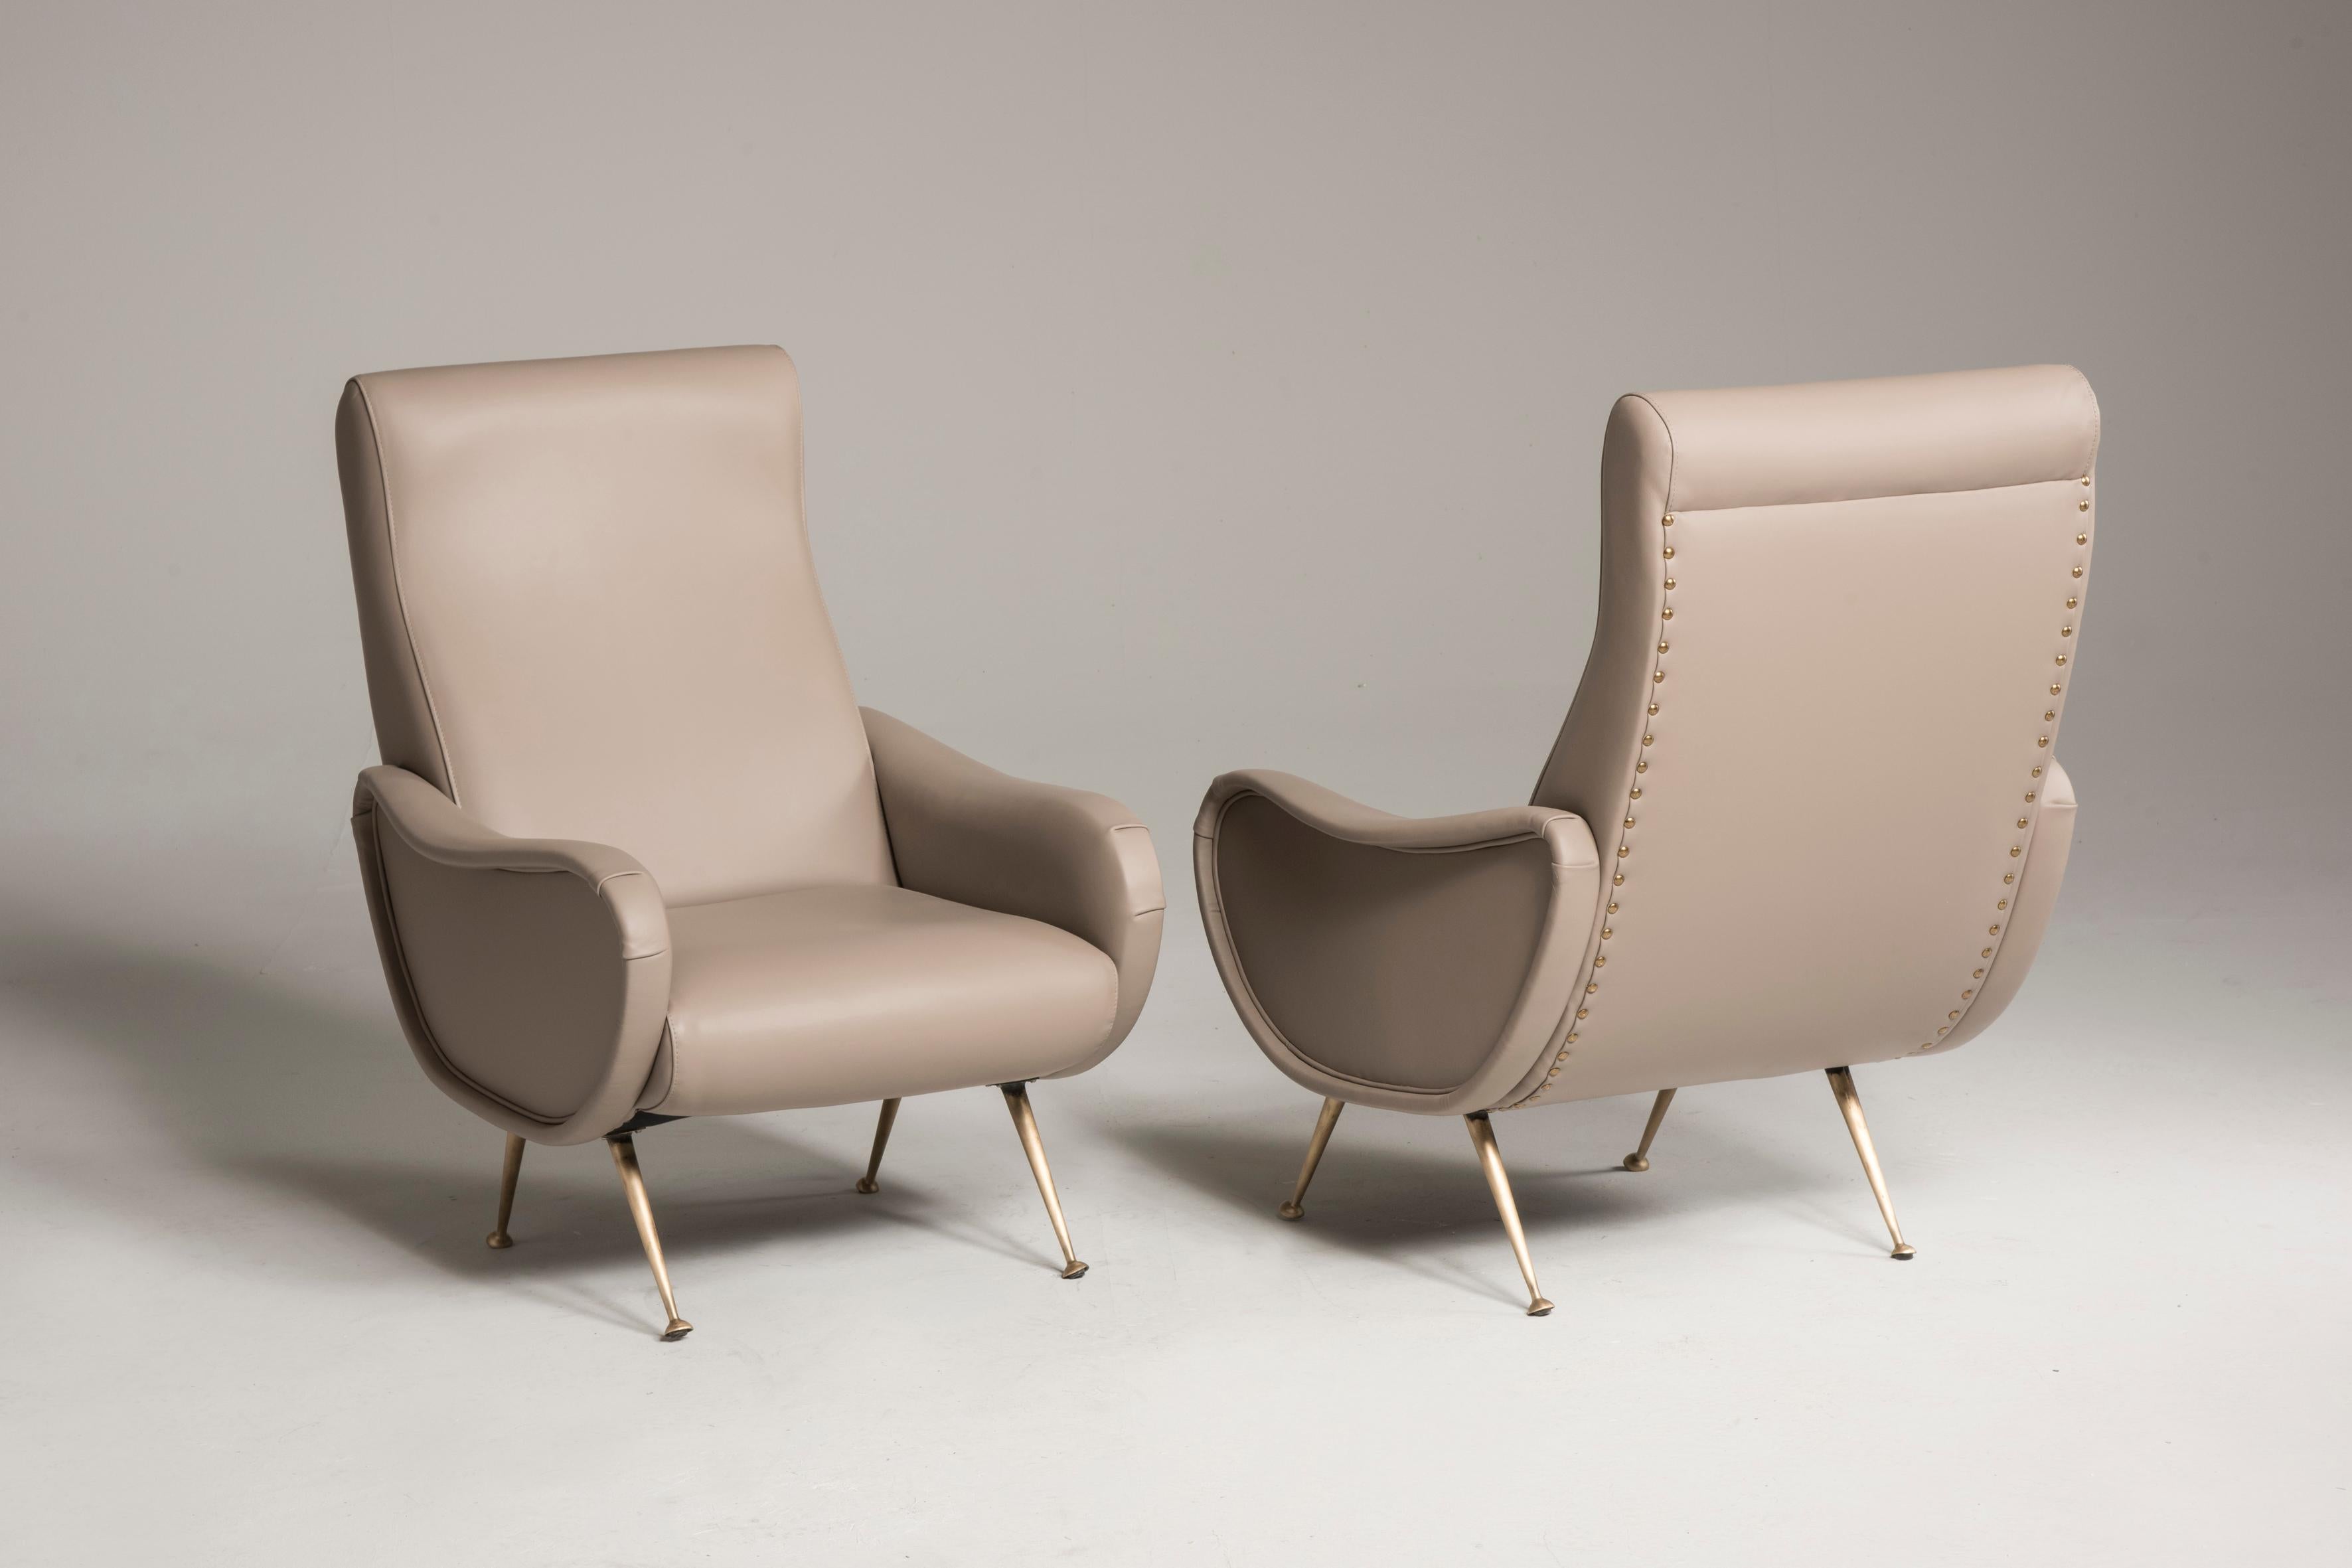 Italian 1950s Reupholstered Mauve Leather Armchairs in style of Zanuso Lady Model For Sale